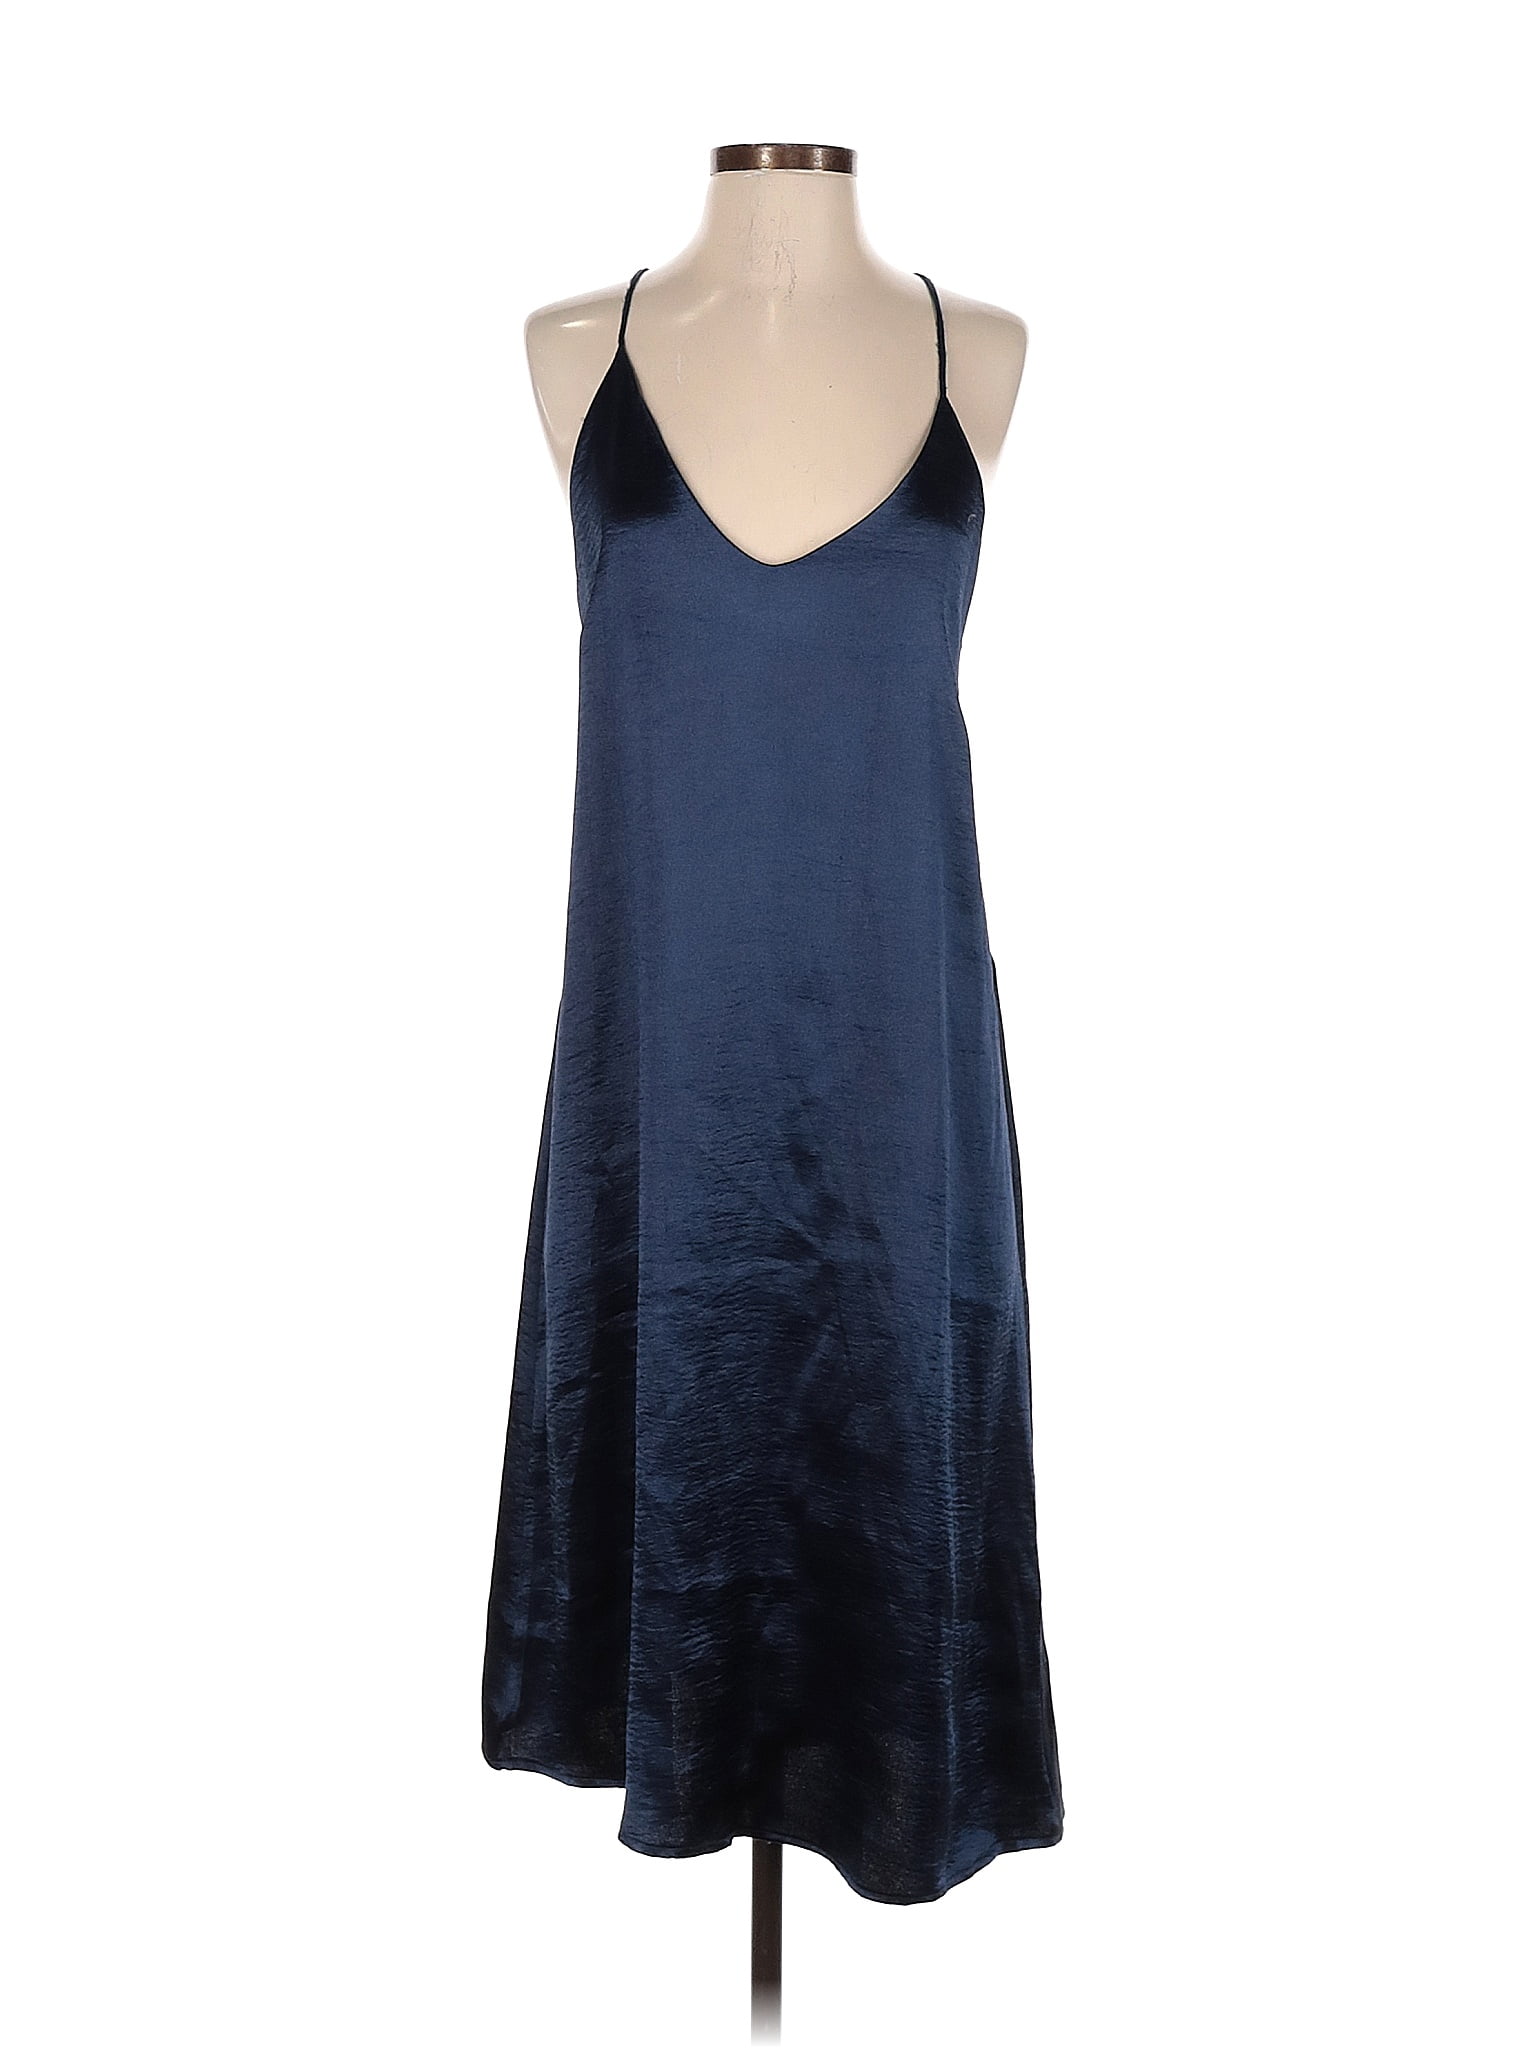 Lumiere 100% Polyester Solid Navy Blue Cocktail Dress Size S - 42% off ...